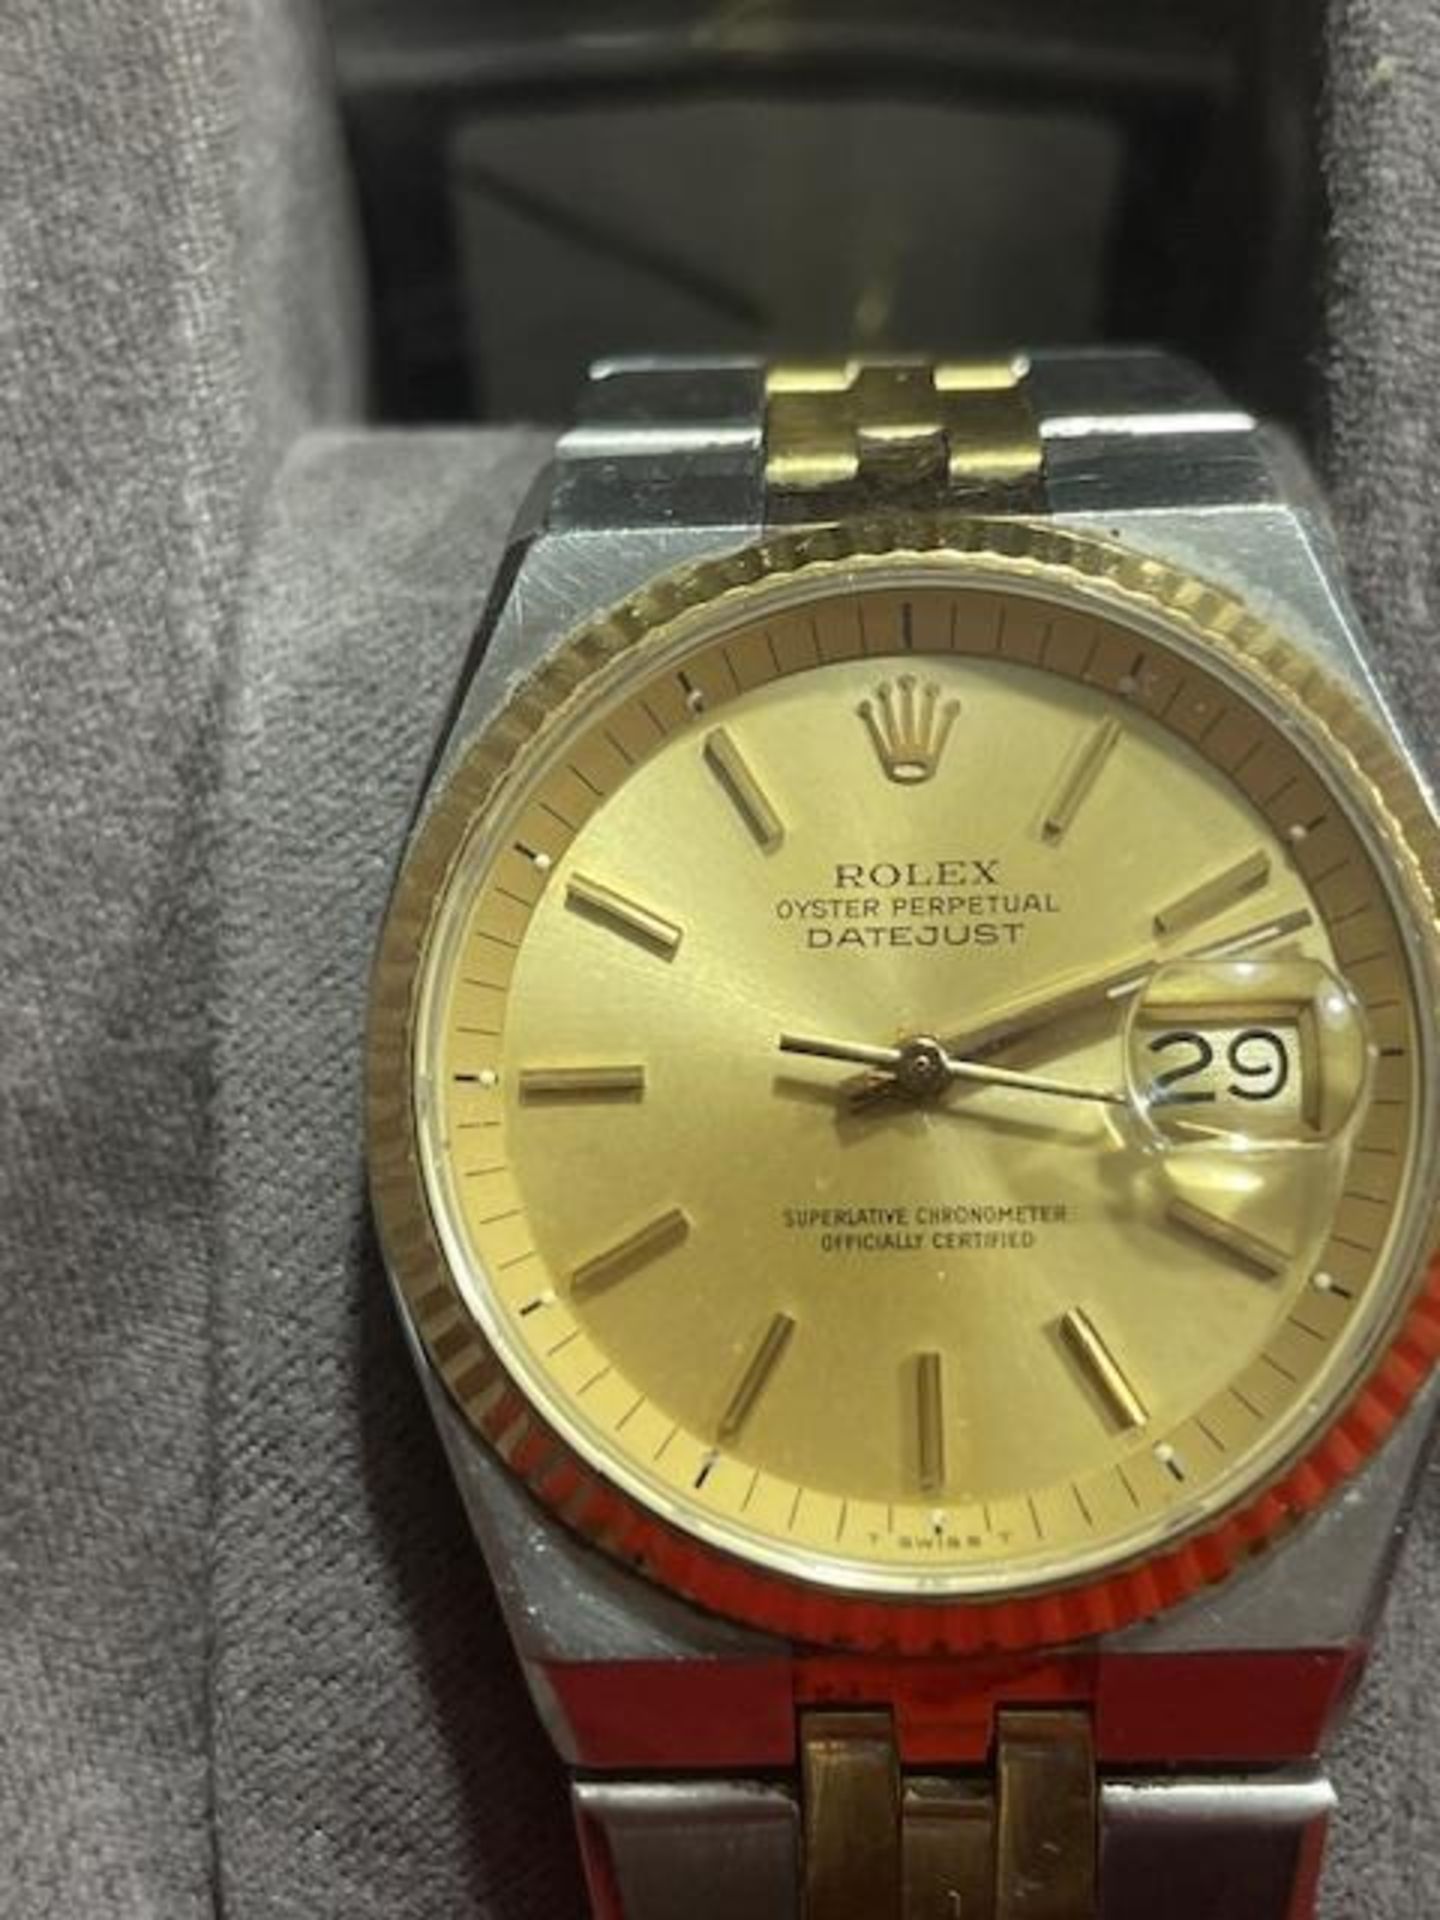 Rolex Oyster Purpetual DATEJUST Mens Watch - Image 12 of 20